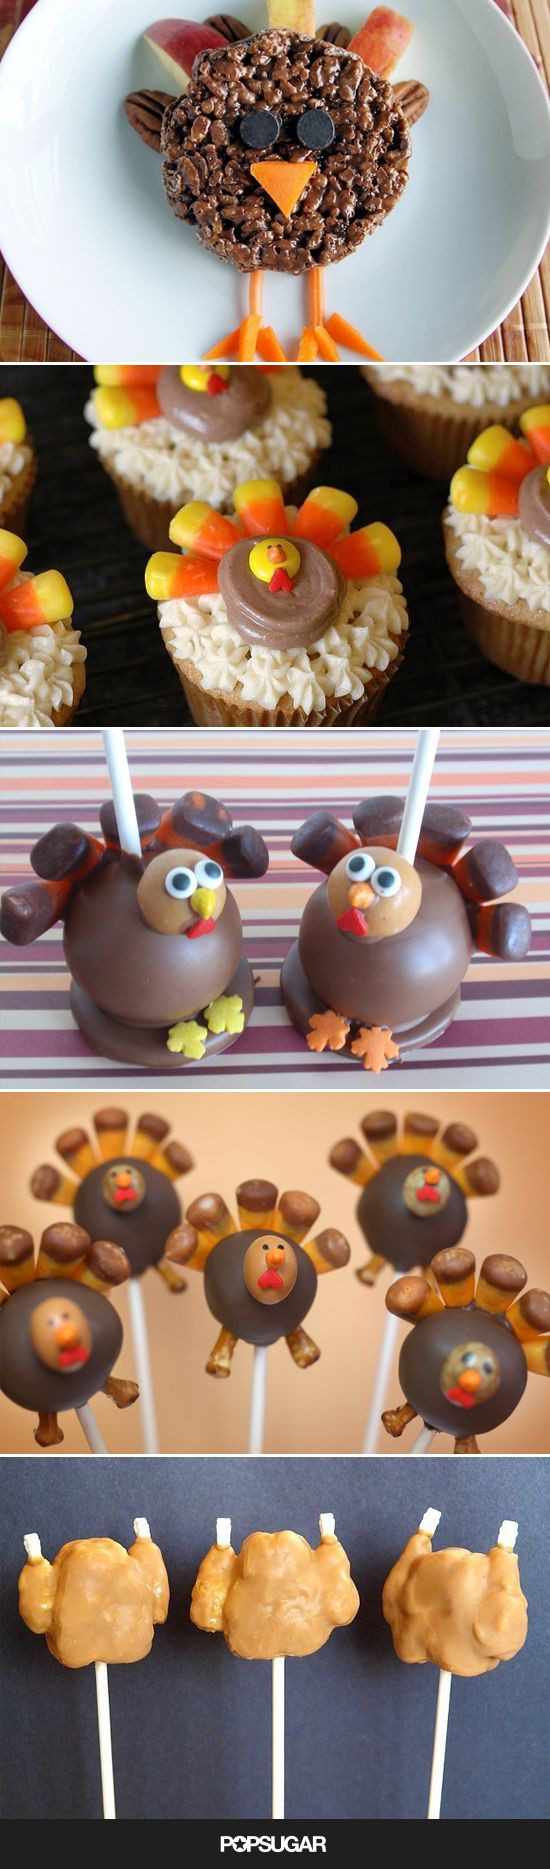 Fall Themed Desserts
 29 Gobble Worthy Thanksgiving Themed Treats